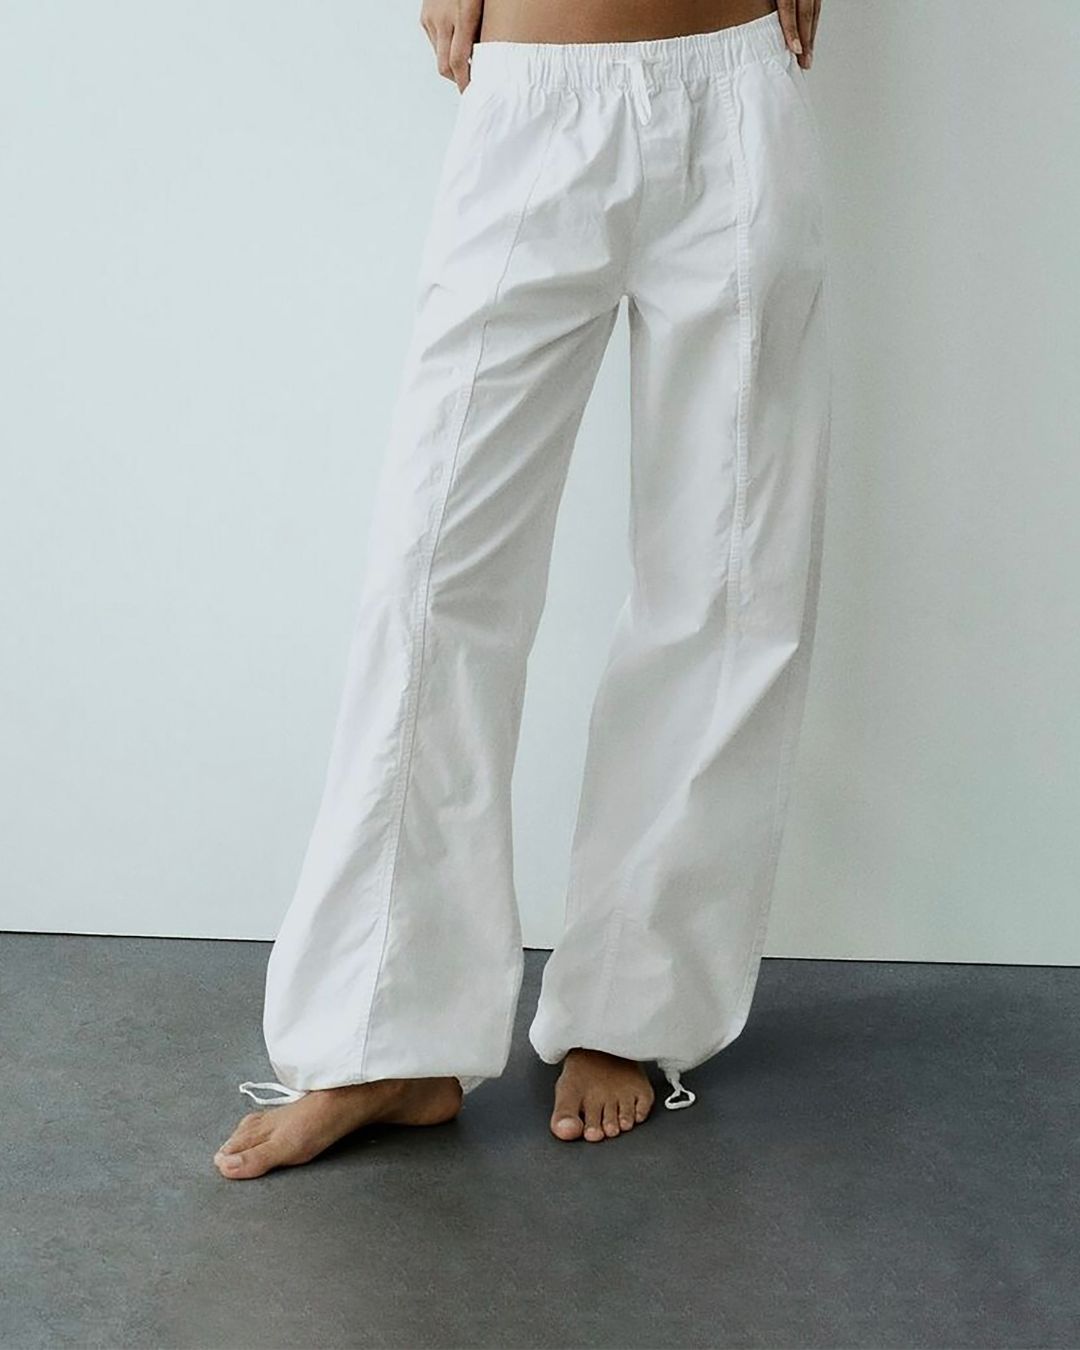 PARACHUTE PANTS,baggy fit, bottomwear, casual, cotton, drawstring, full length, mid rise, parachutes, streetwear, white, woven,parachute-pants-white,Color- White
Fabric- Cotton
Fit- Baggy Fit 
Length- Full Length (41in)
Waist- High Rise
Hem- Drawstring Hem
Closure- Elasticated Waist
No. of Pockets- 2
Print- Solid